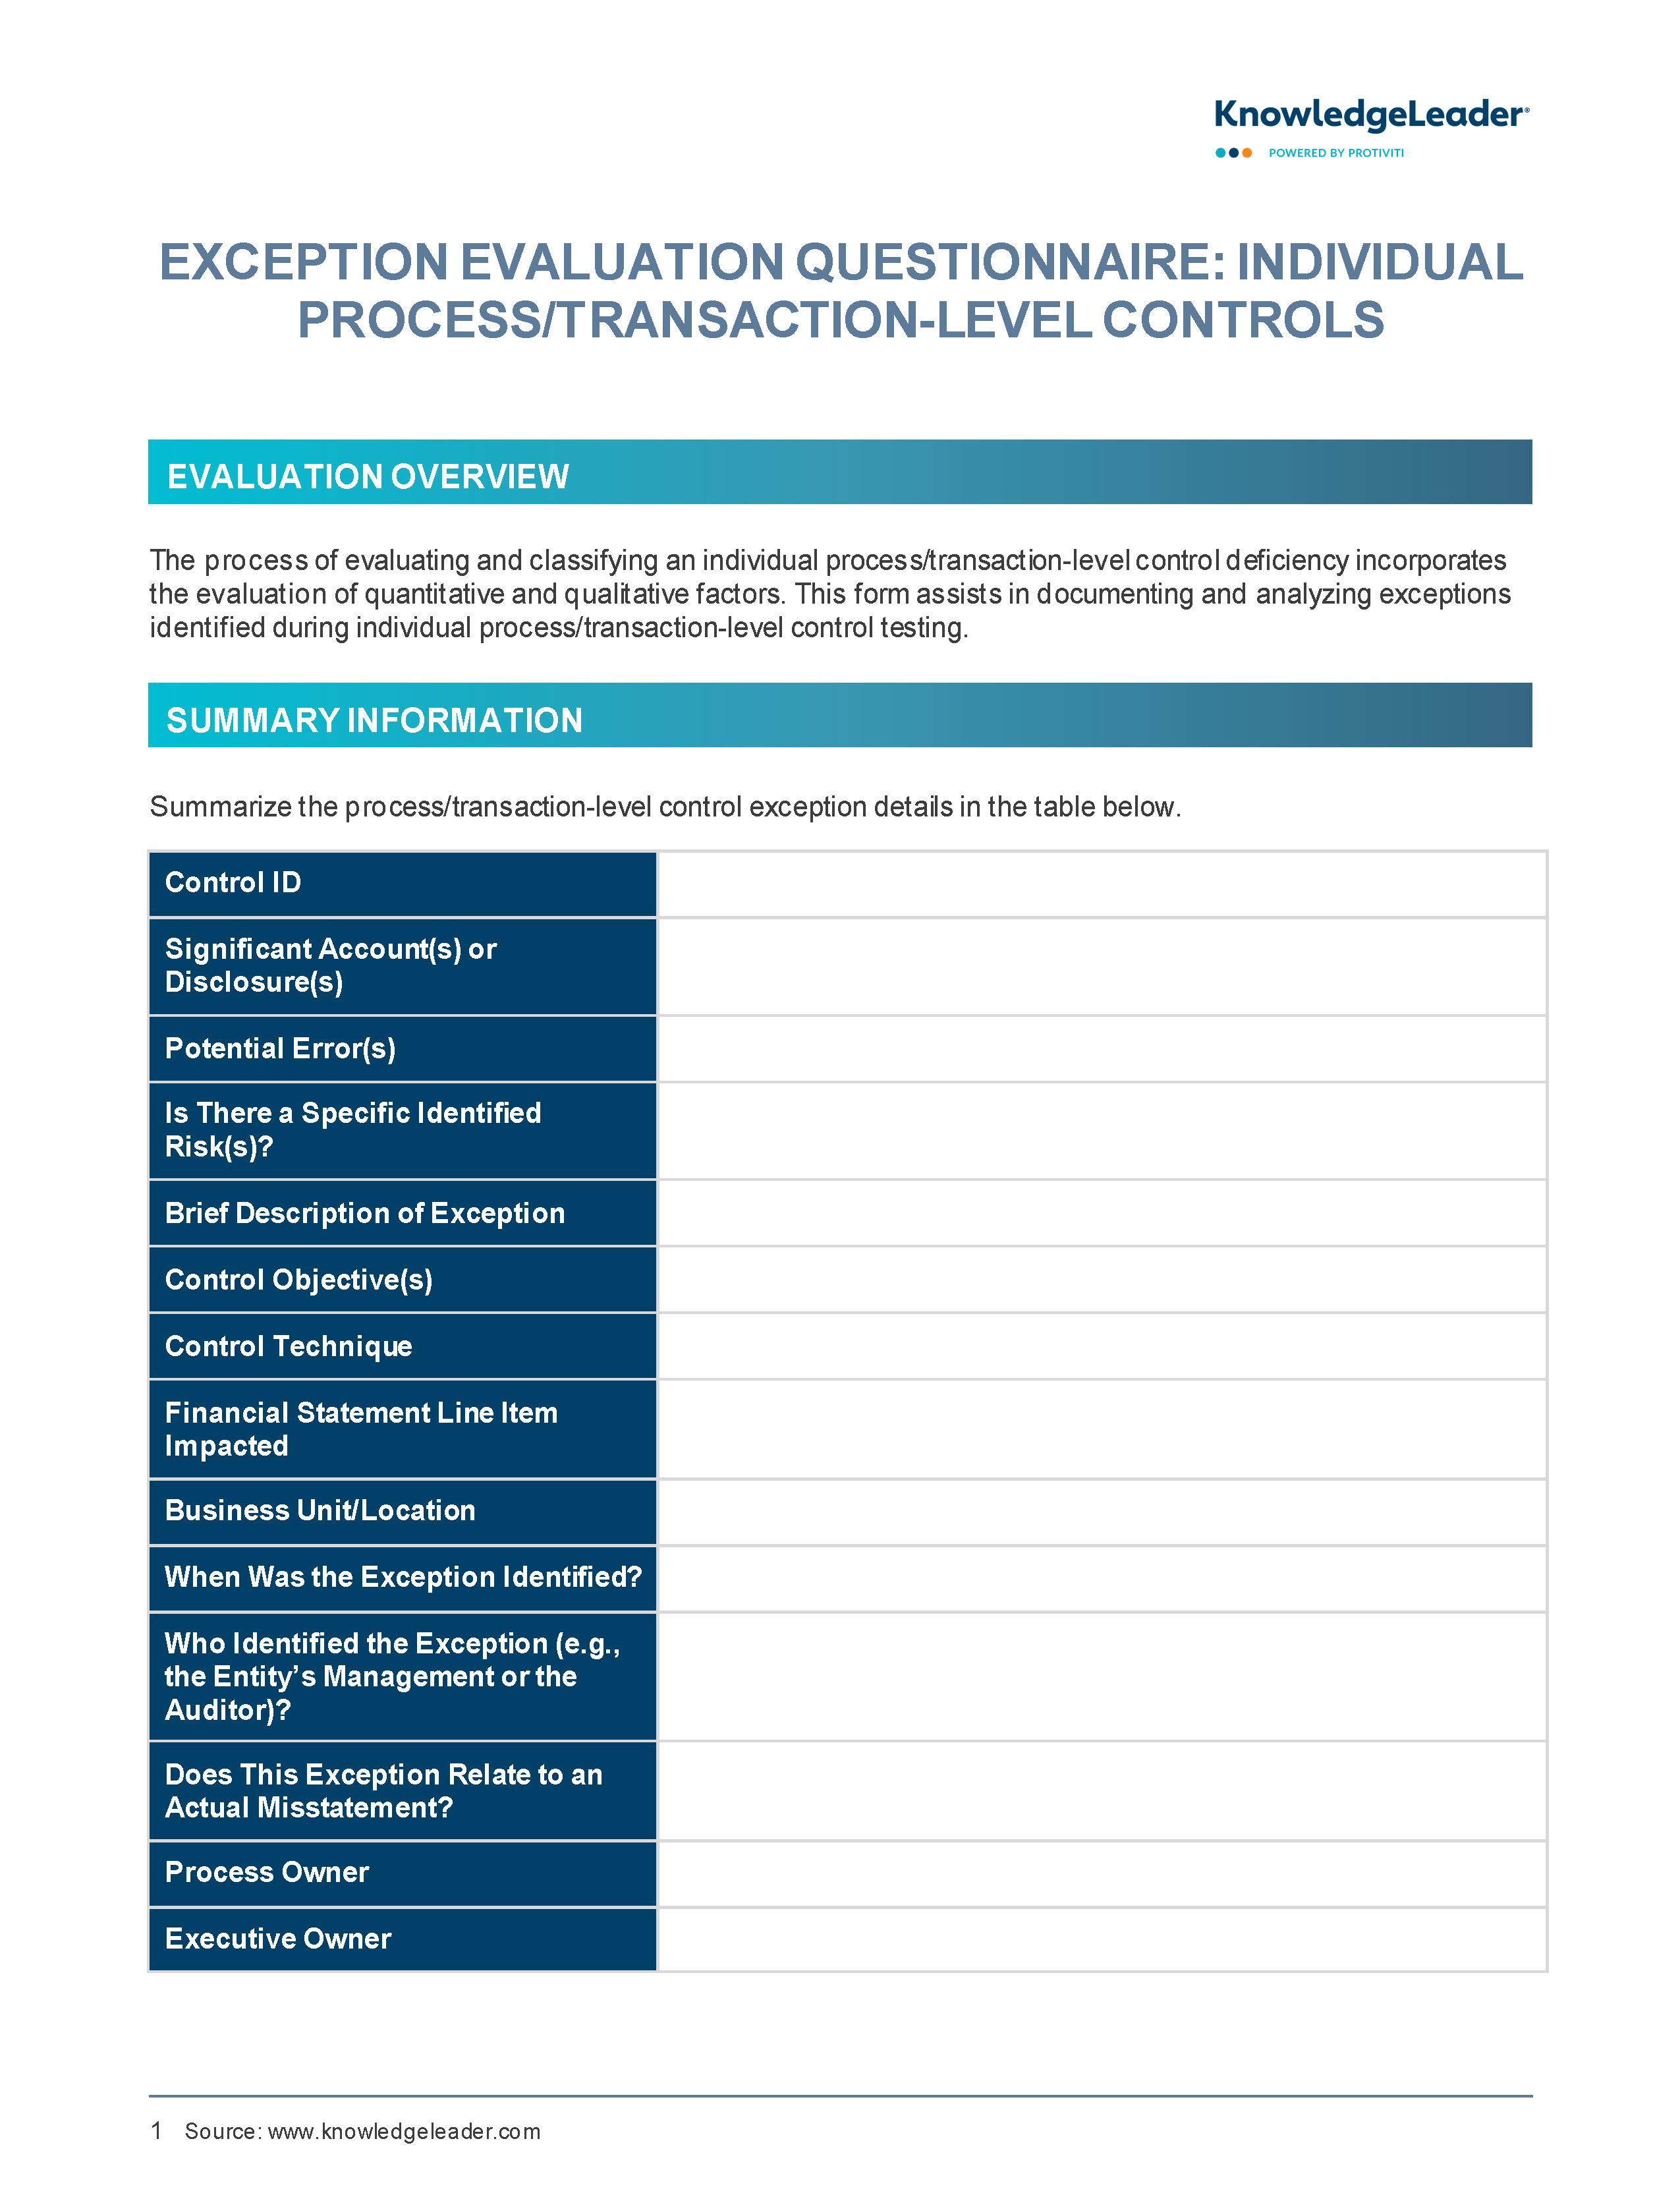 Screenshot of the first page of Exception Evaluation Questionnaire - Individual Process Transaction-Level Controls